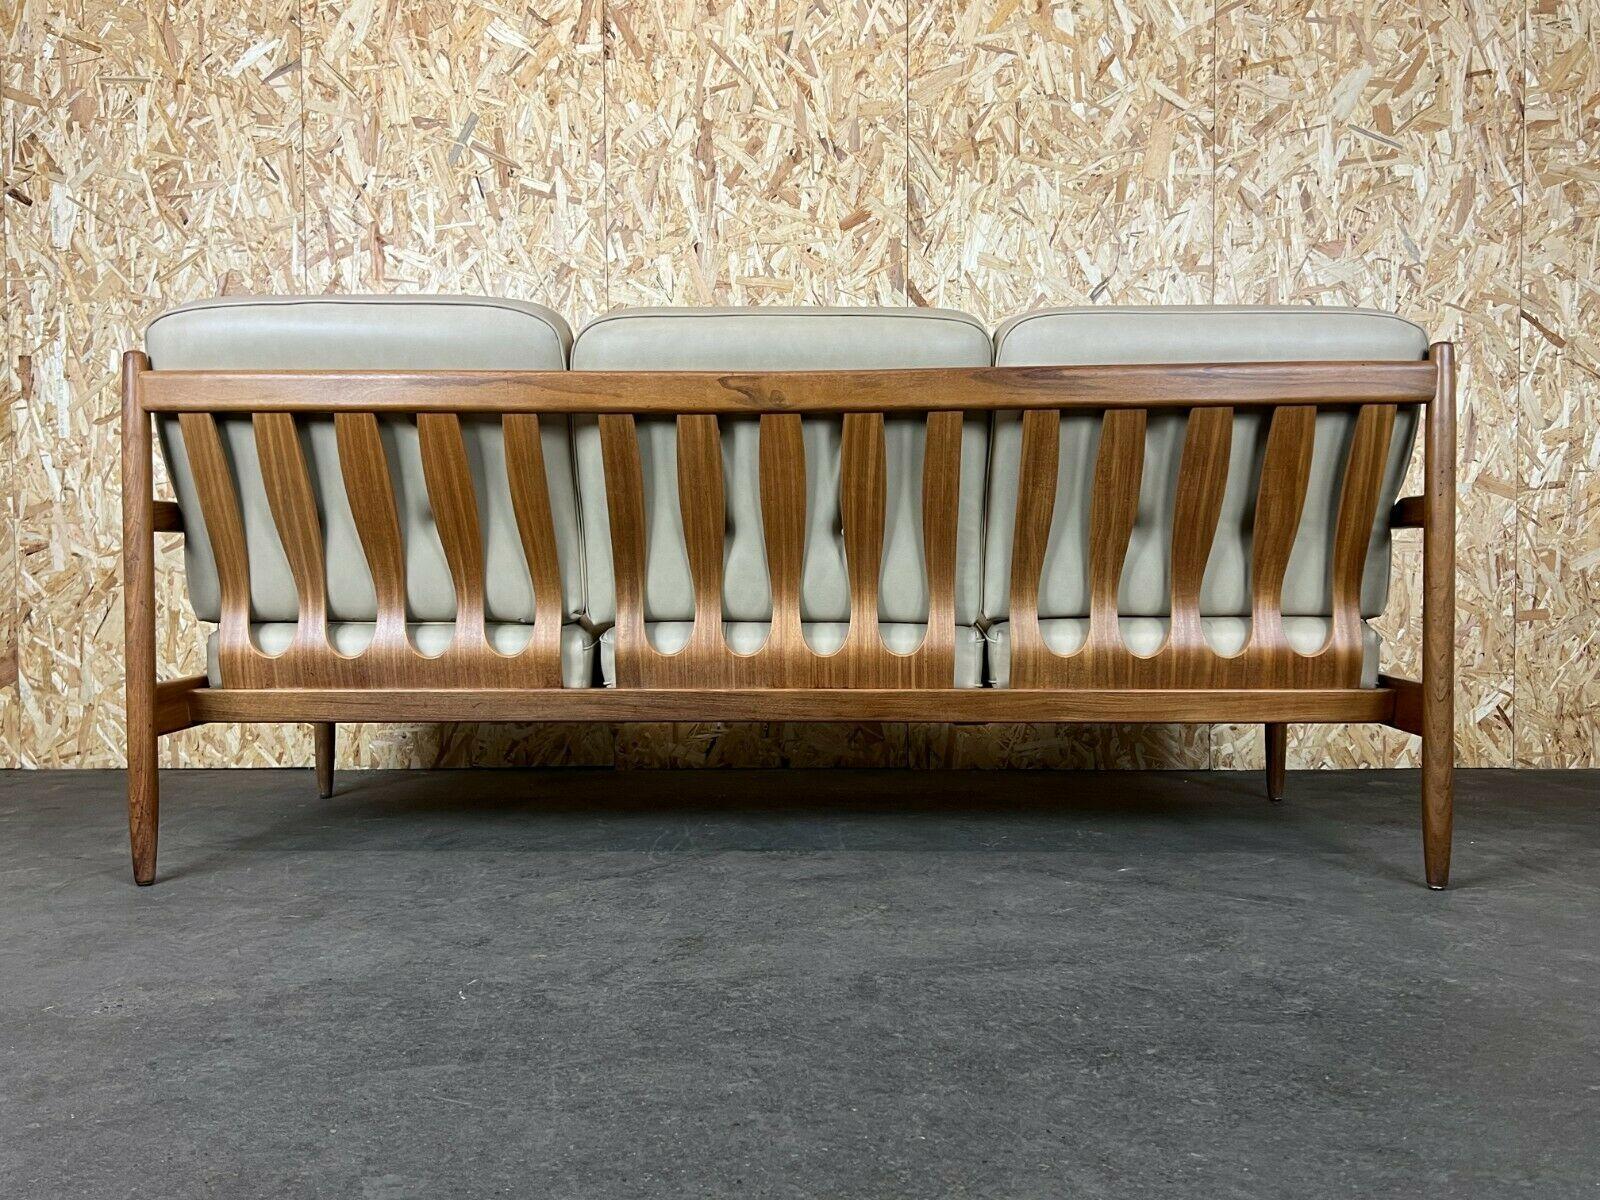 60s 70s Sofa 3-Seater Couch Seating Set Danish Modern Design Denmark For Sale 2